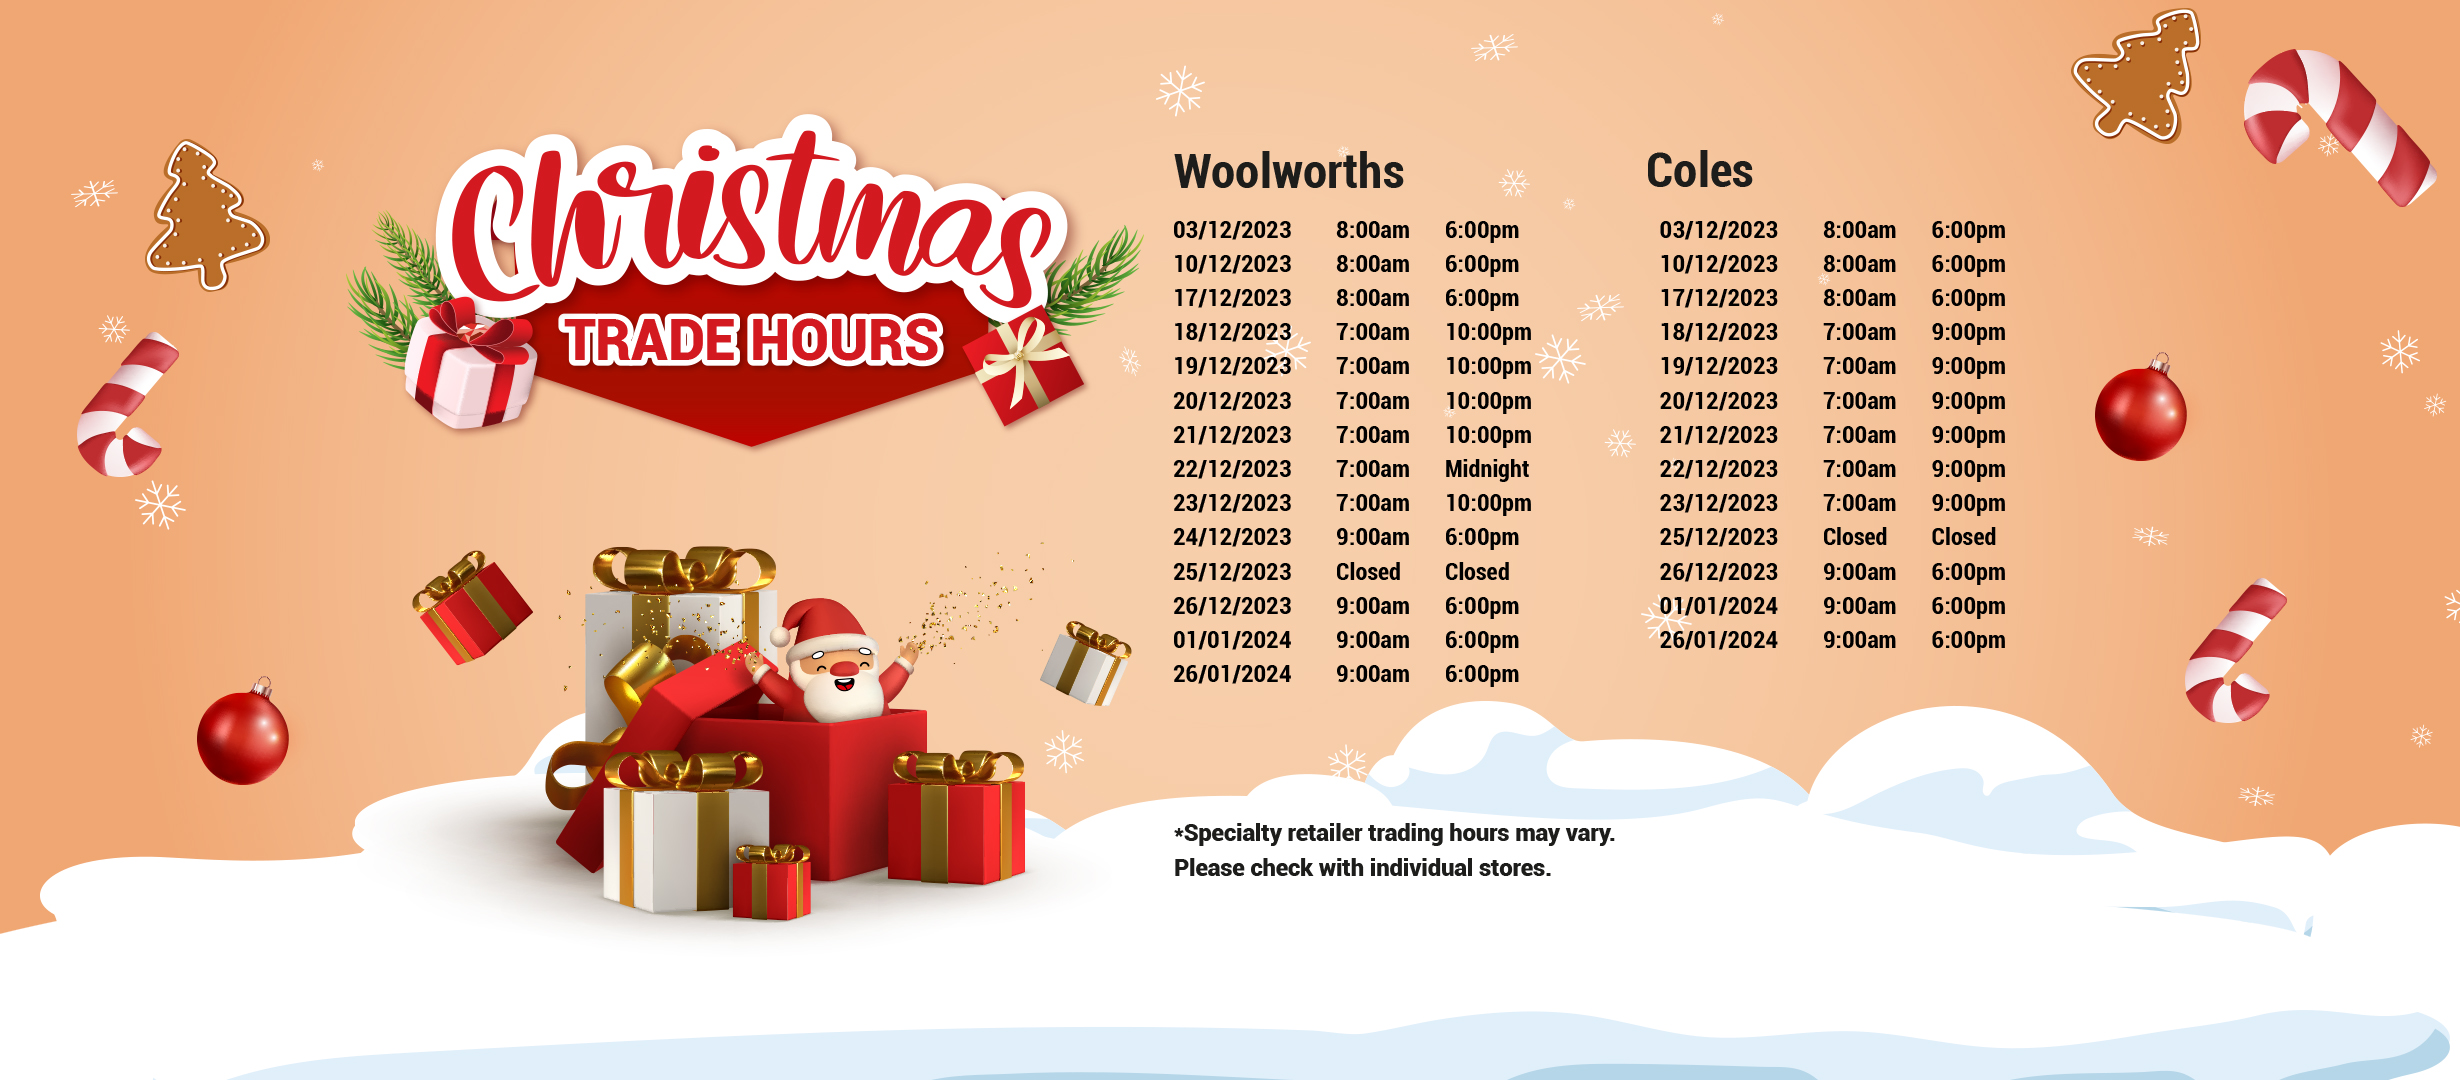 Christmas Trading Hours at Pelican Waters